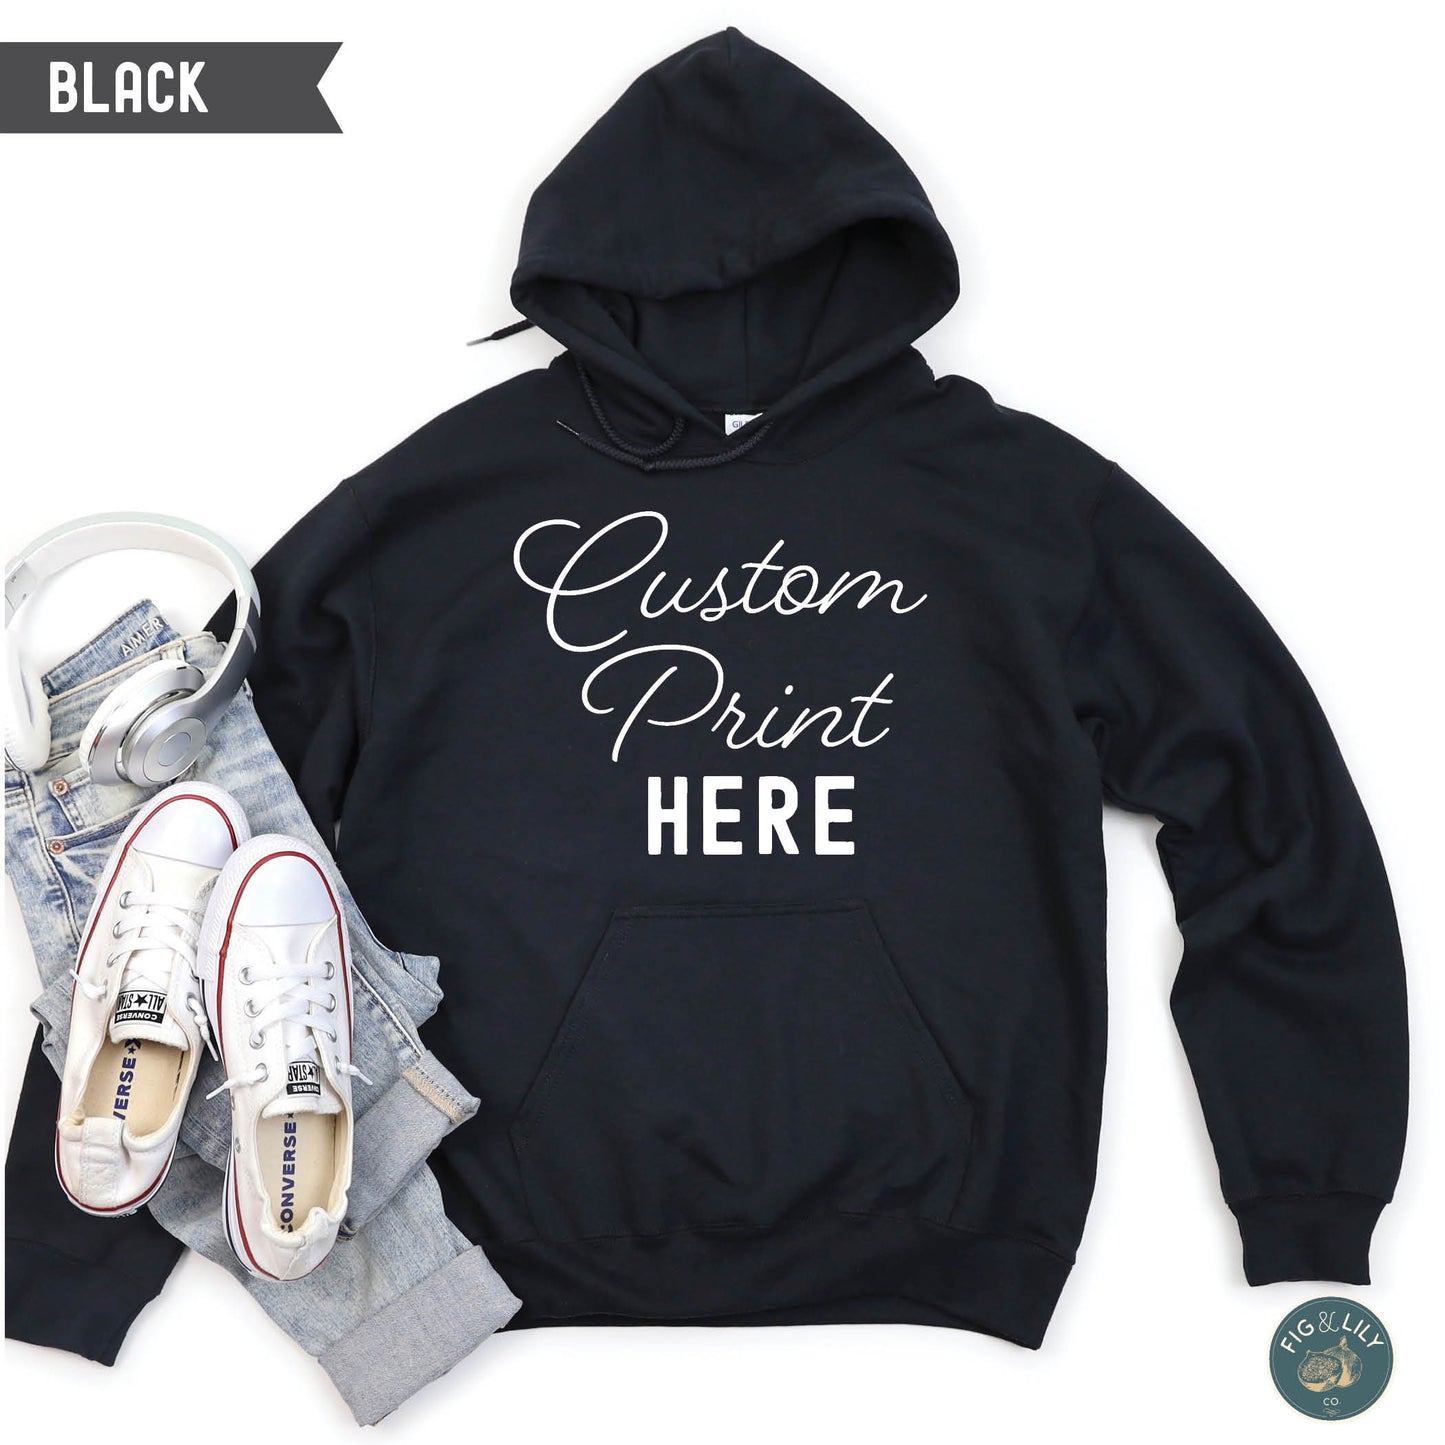 Black Unisex Hoodie, Custom Printed sweatshirt Design, Your Design Here, Personalized Design created just for you, digital proof approval included